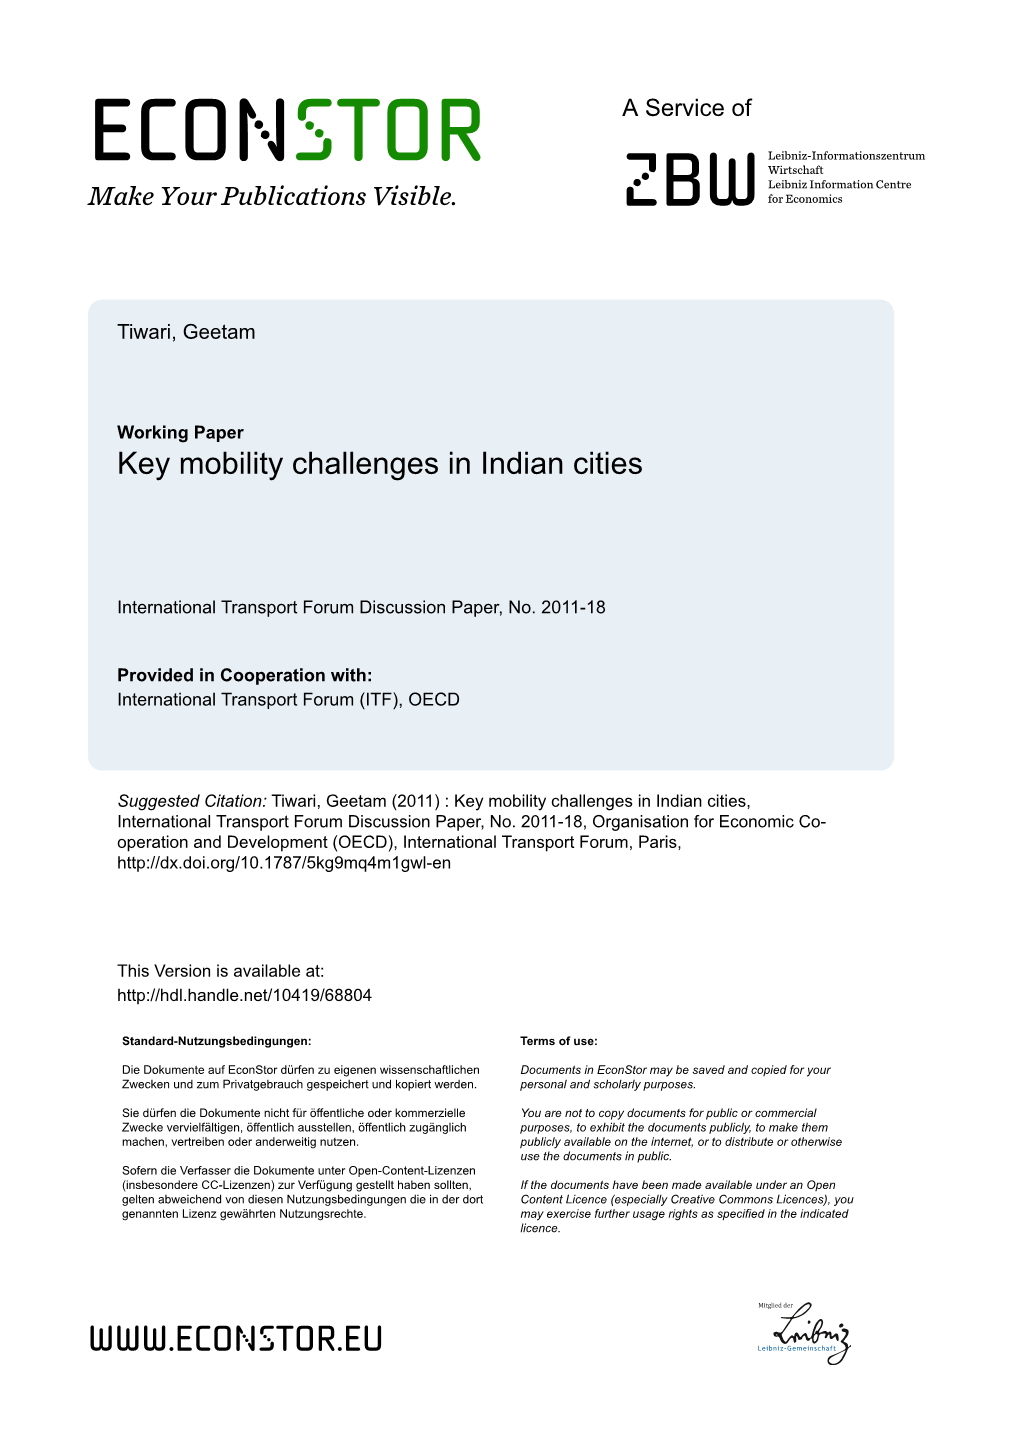 Key Mobility Challenges in Indian Cities